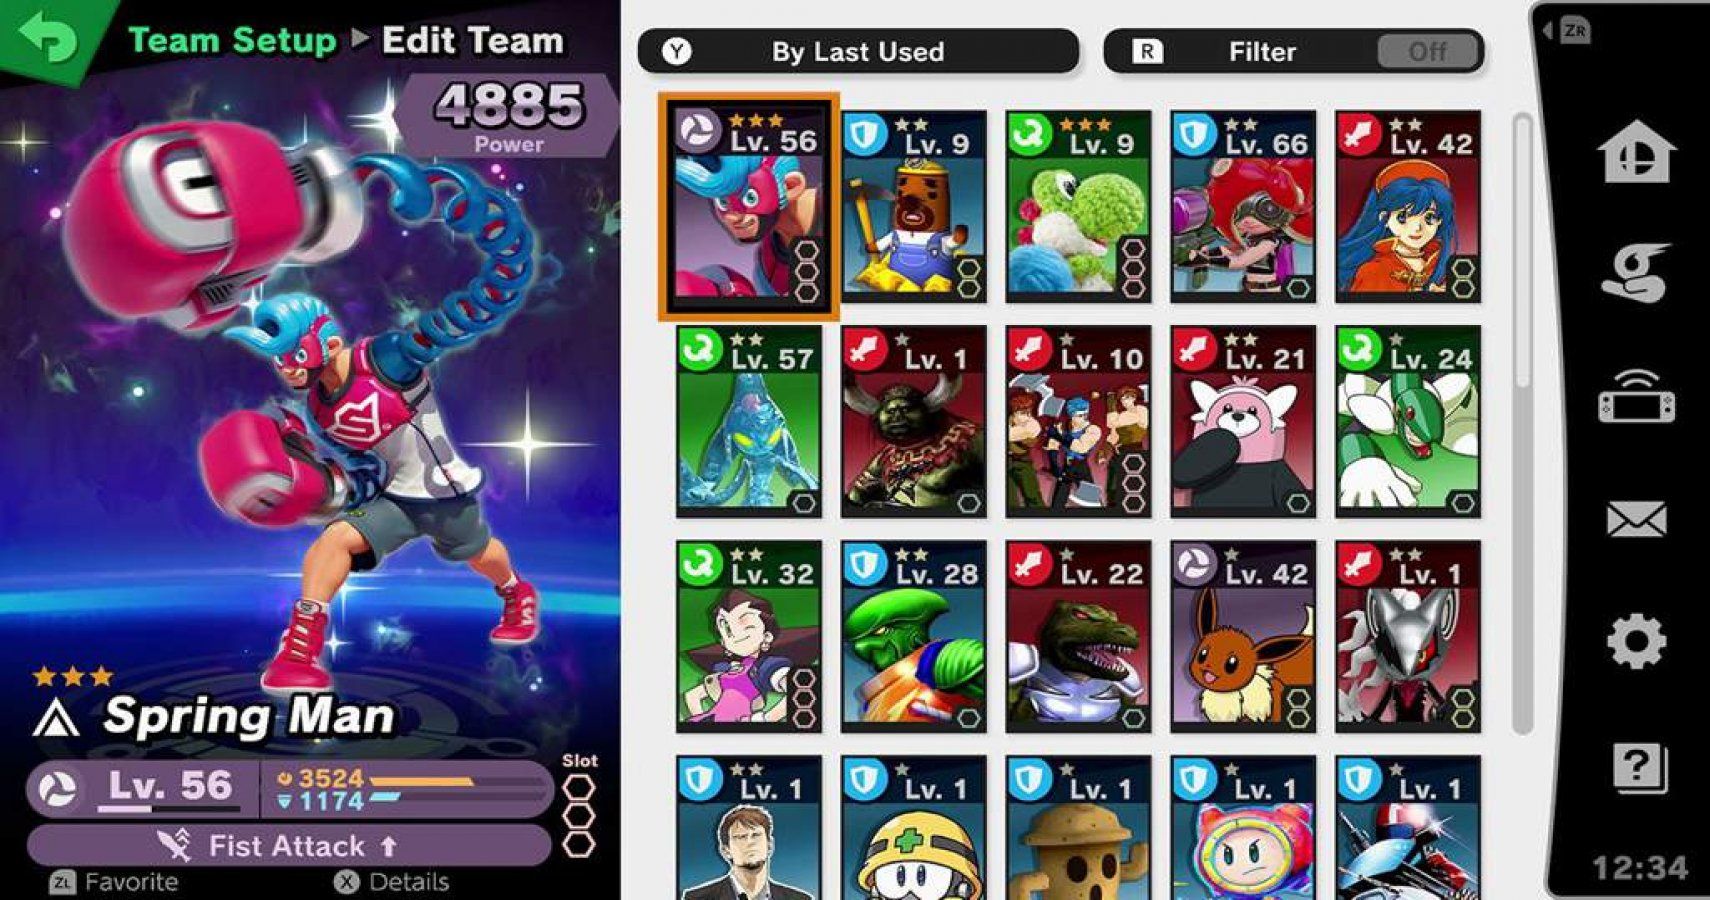 Pokemon Sword and Shield Spirits Now Live in Smash Ultimate!